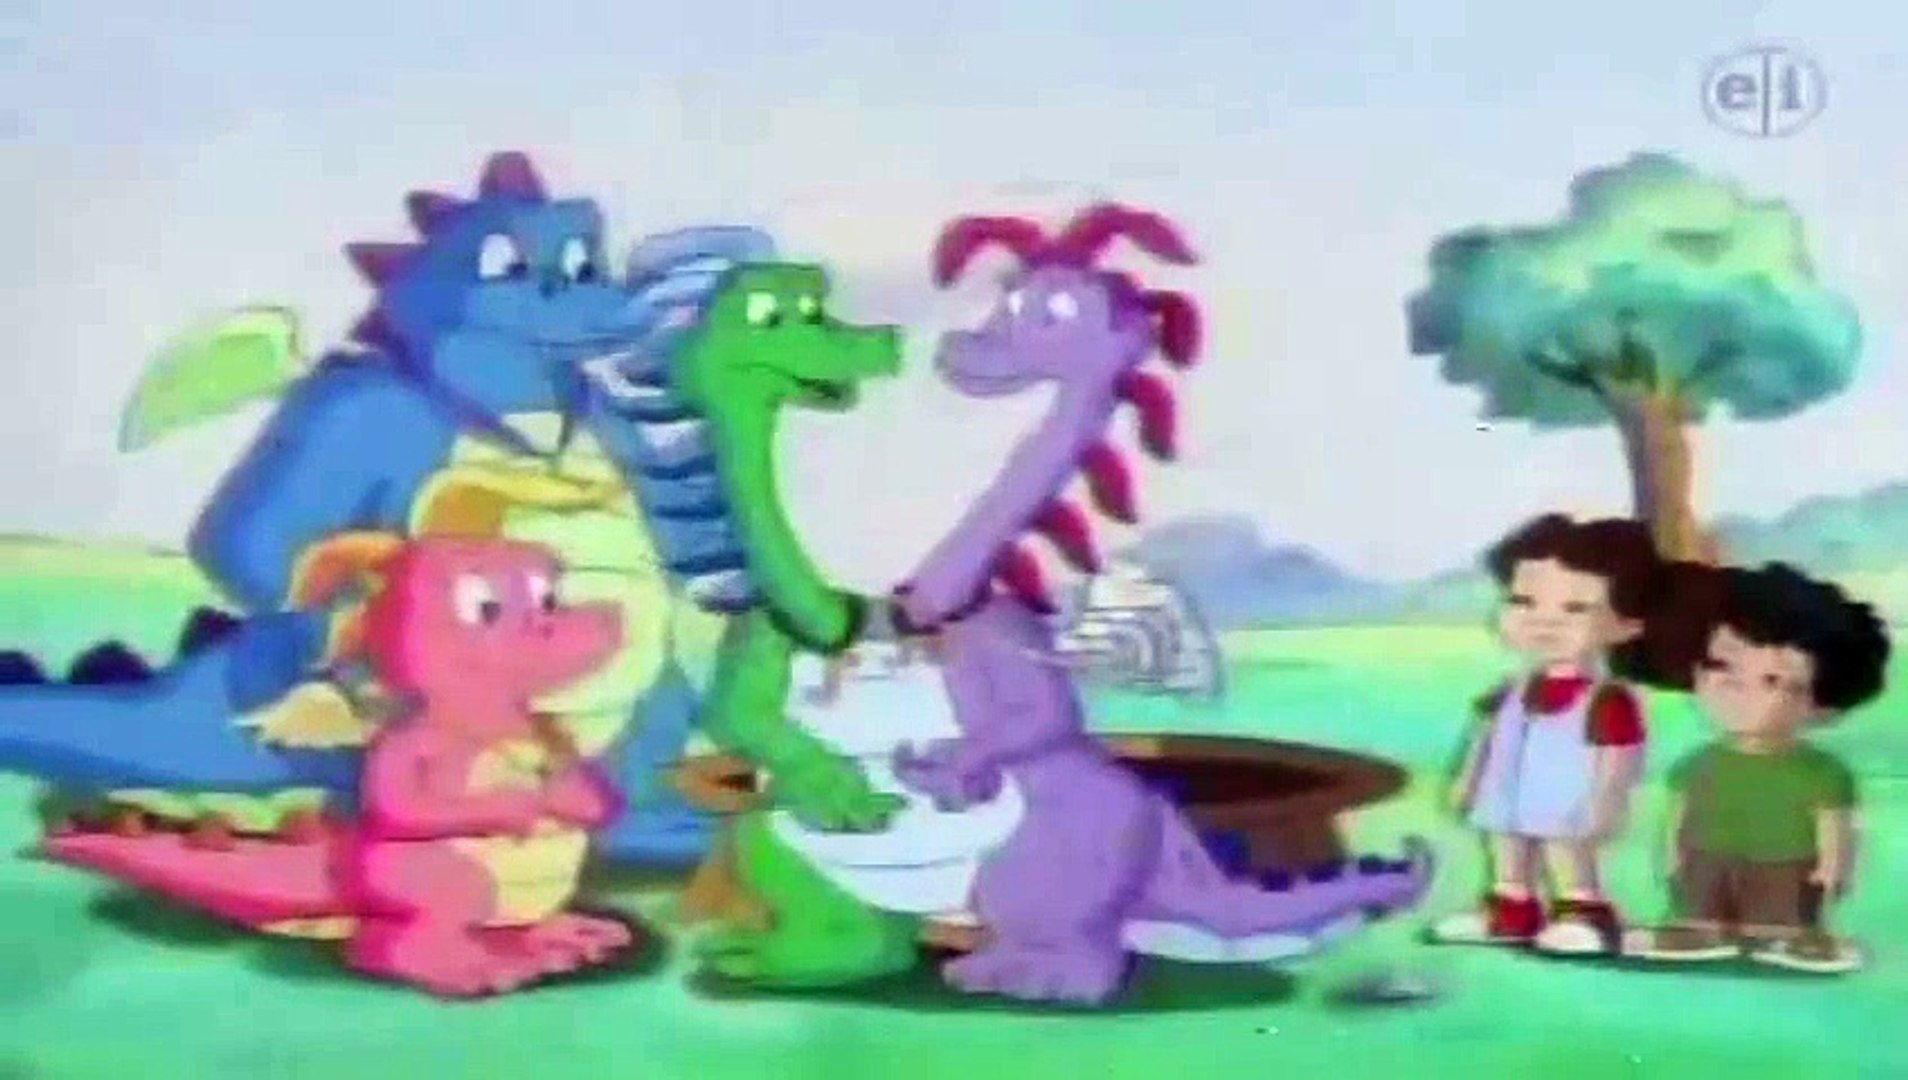 Dragon tales the greatest show in dragon land prepare according to  intrustions - Dailymotion Video